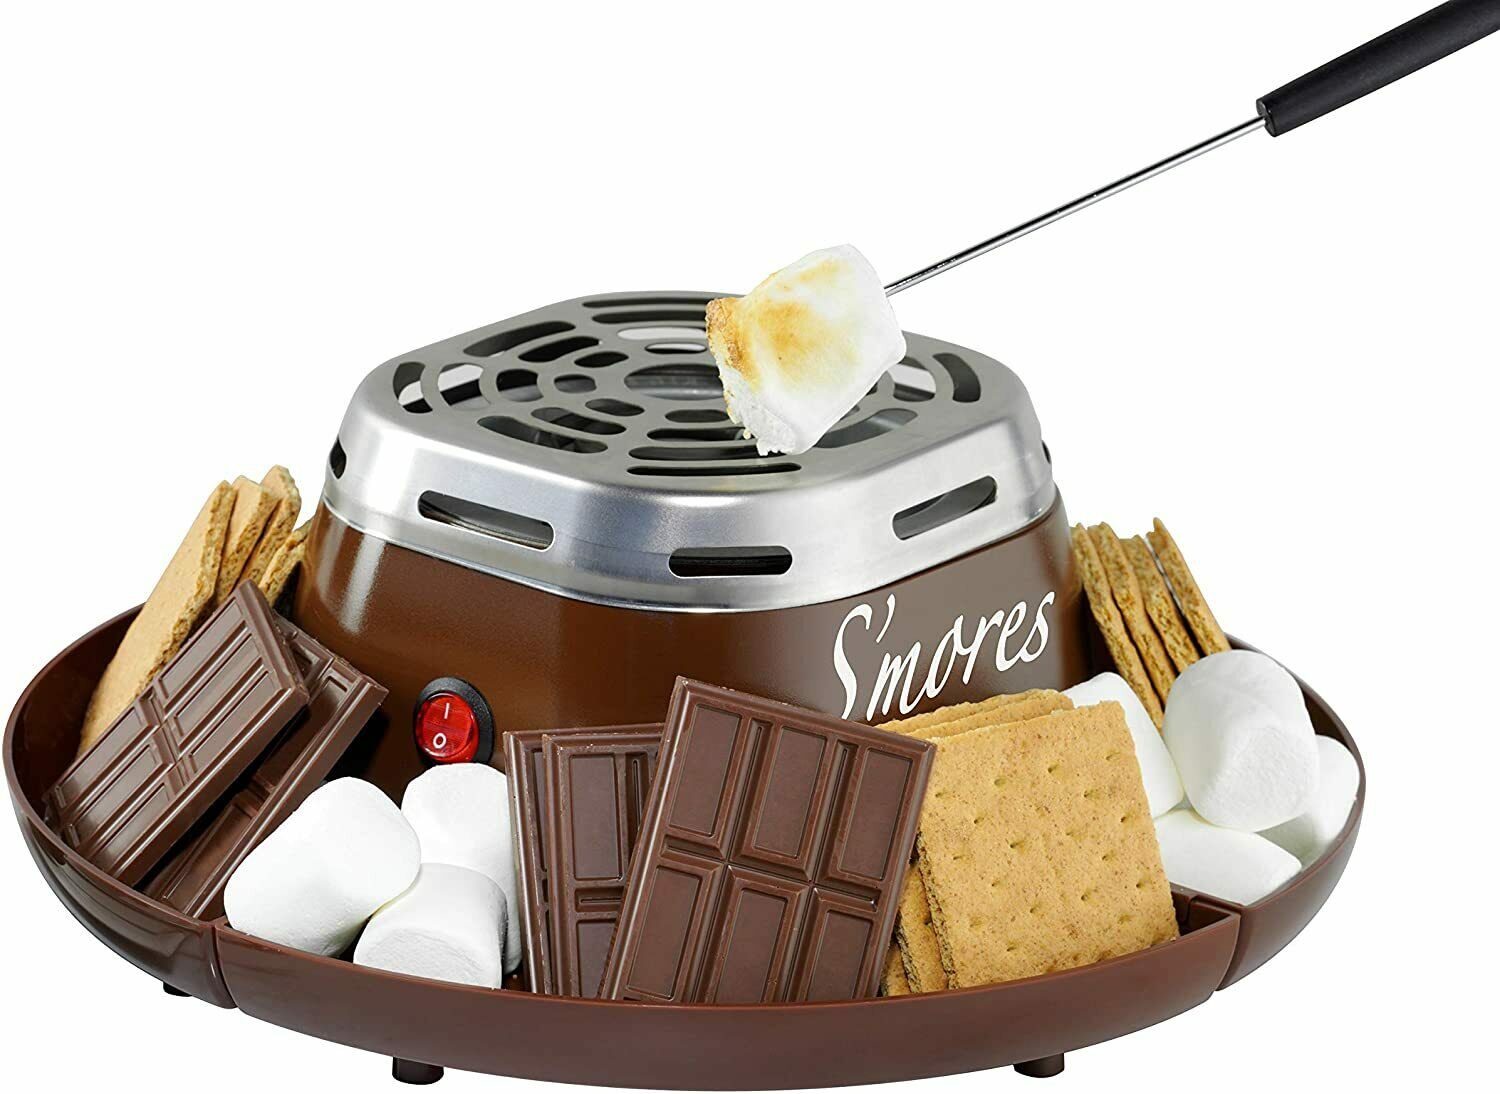 Indoor Electric Stainless Steel S'mores Maker With 4 Compartment Trays